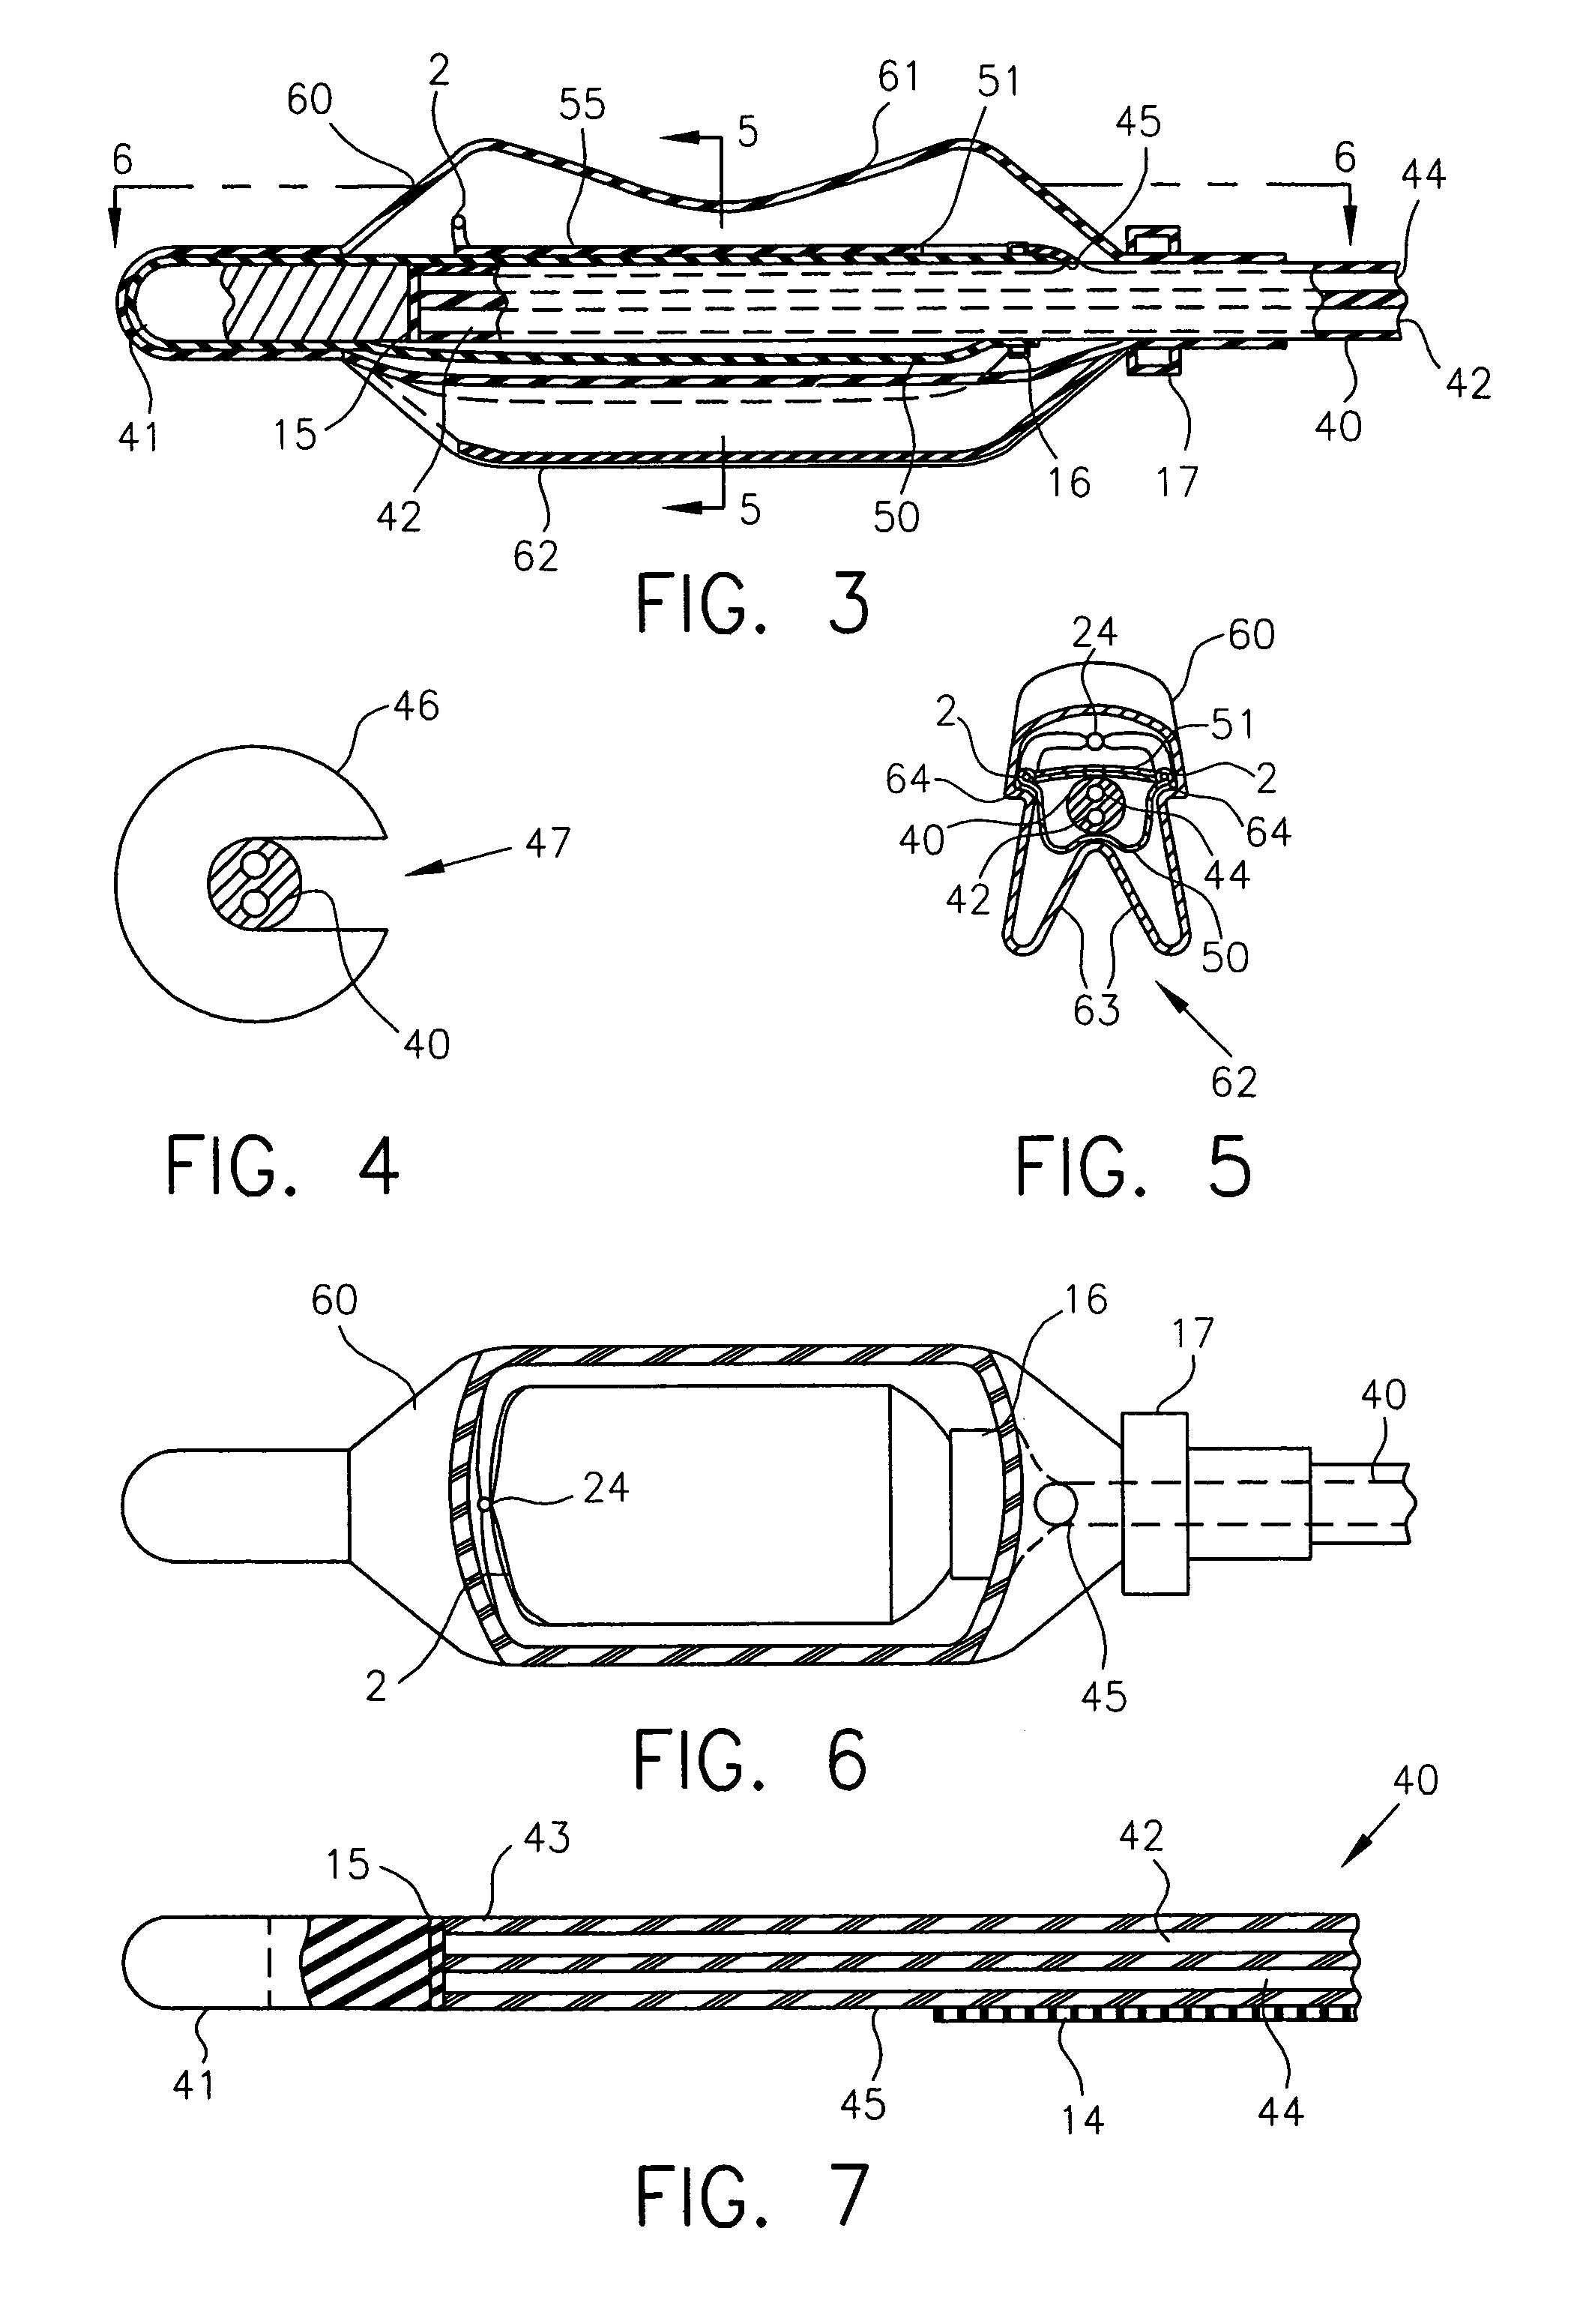 System and method of obtaining images and spectra of intracavity structures using 3.0 Tesla magnetic resonance systems